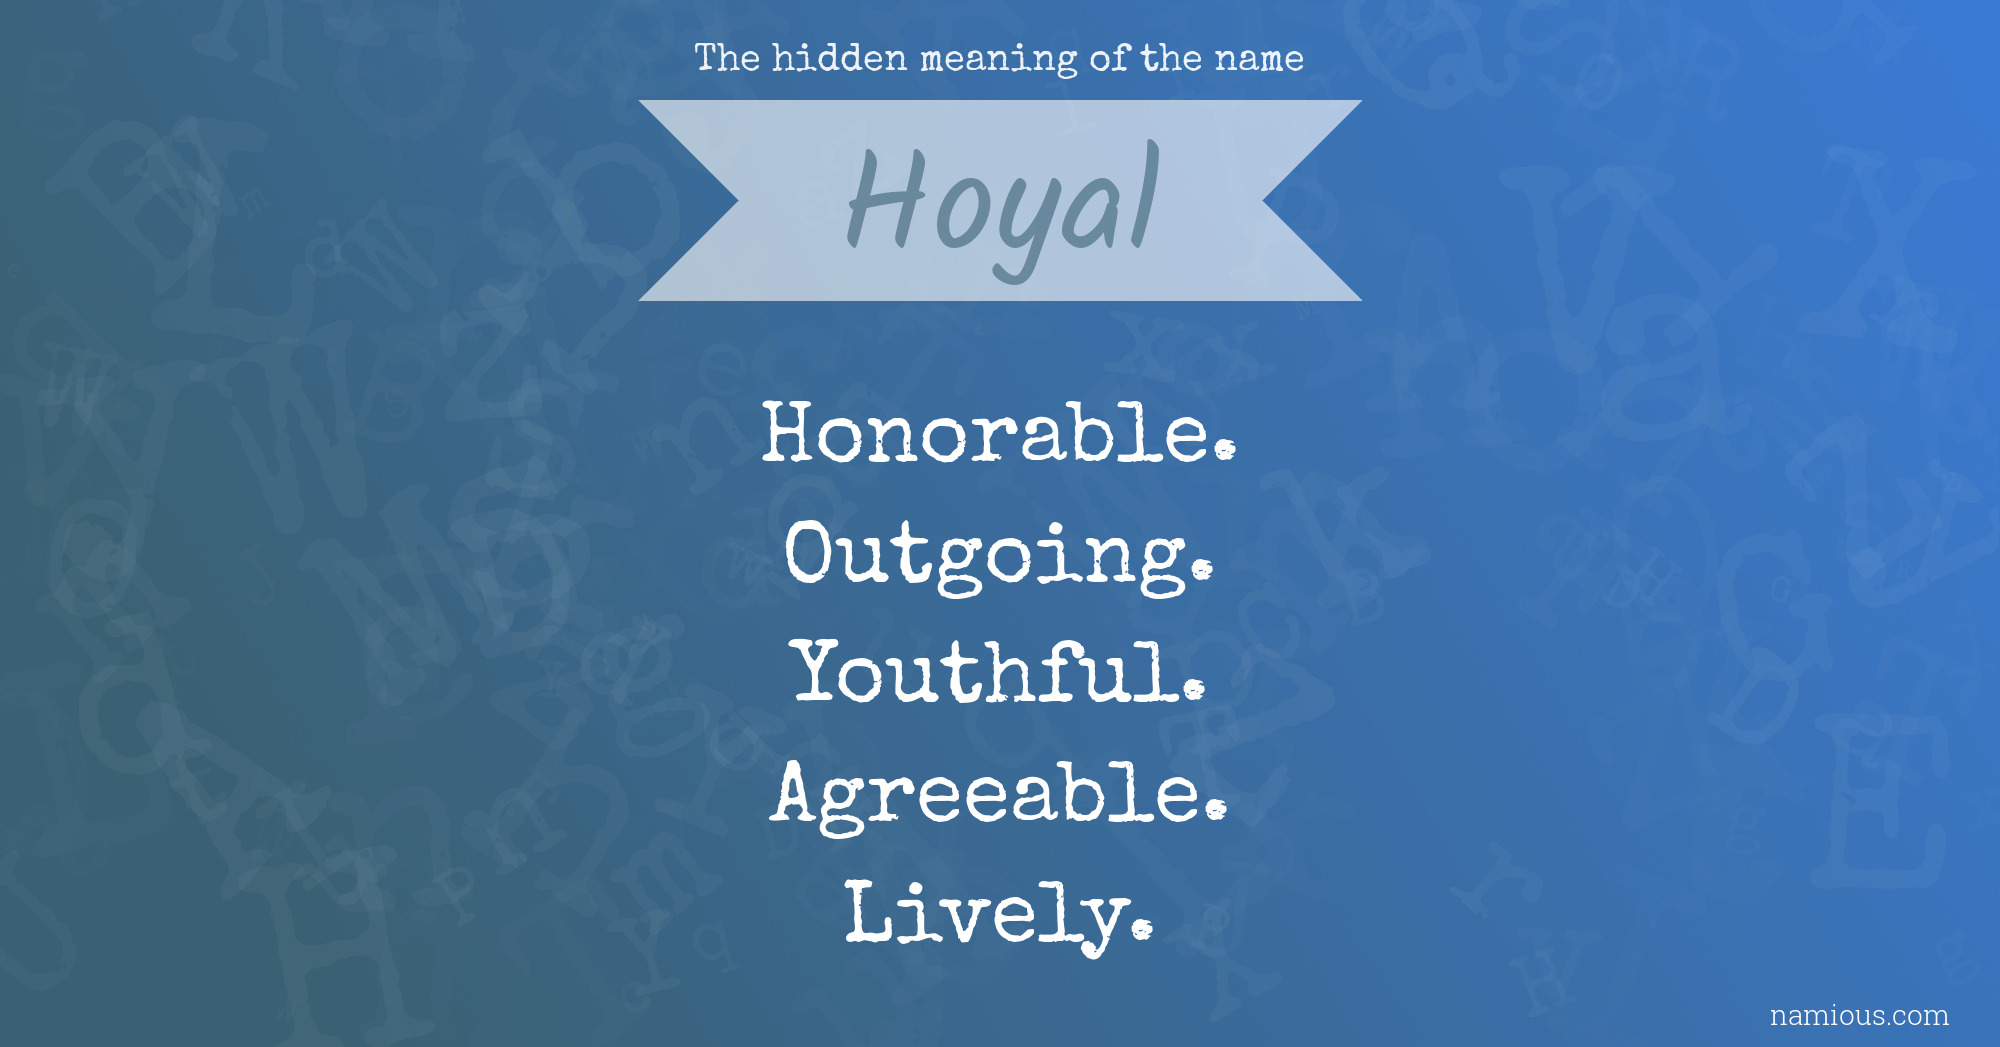 The hidden meaning of the name Hoyal